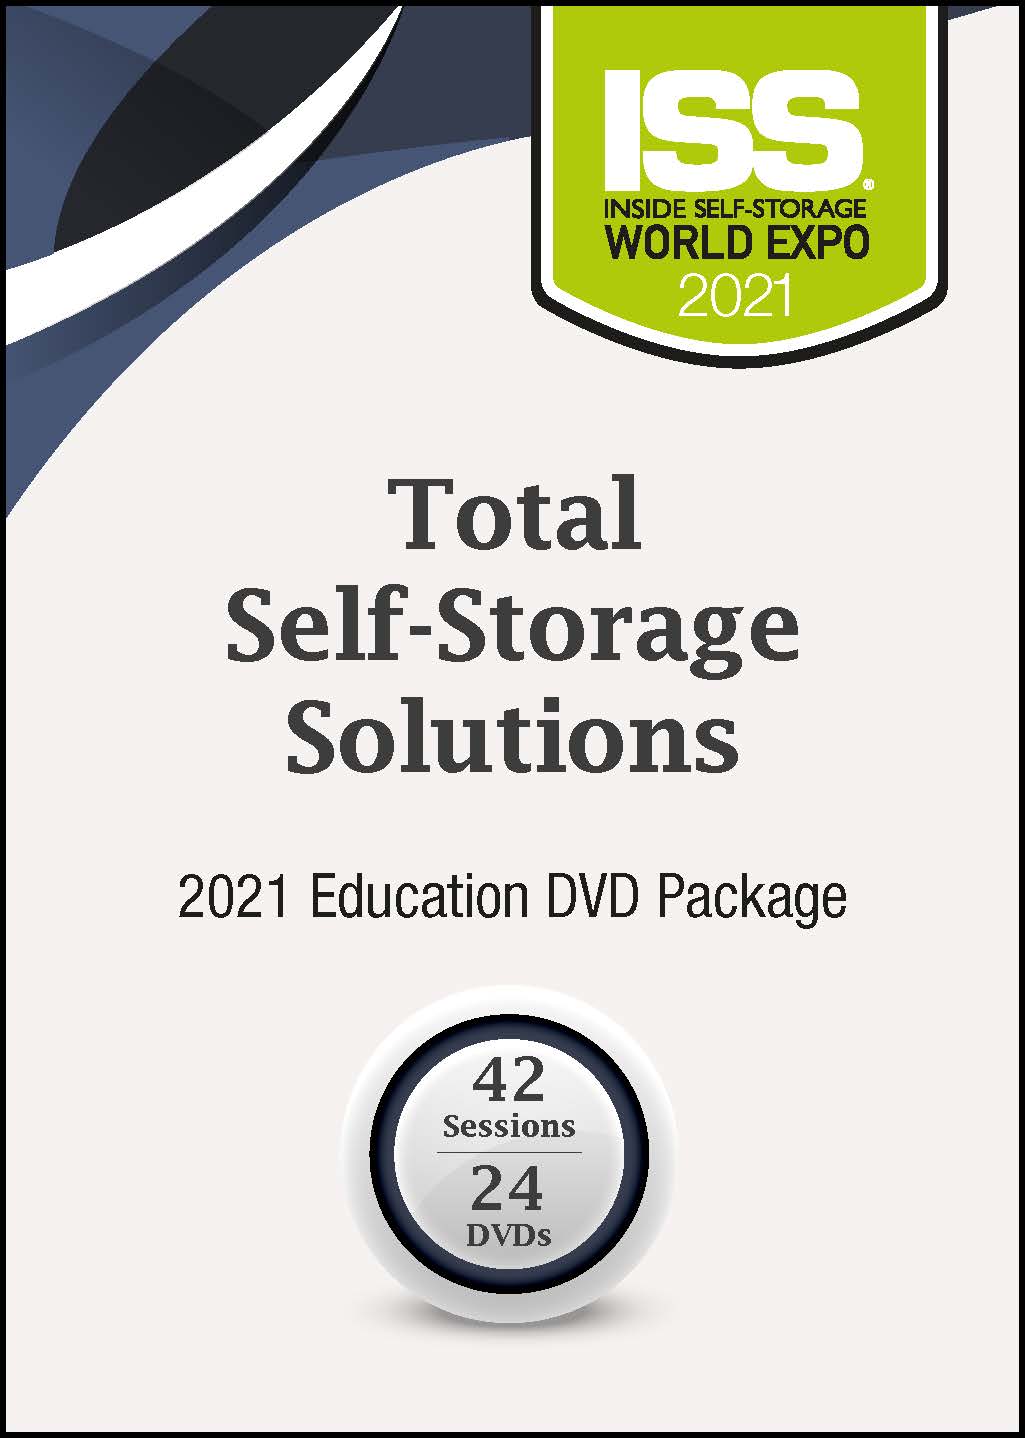 DVD - Total Self-Storage Solutions 2021 Education DVD Package